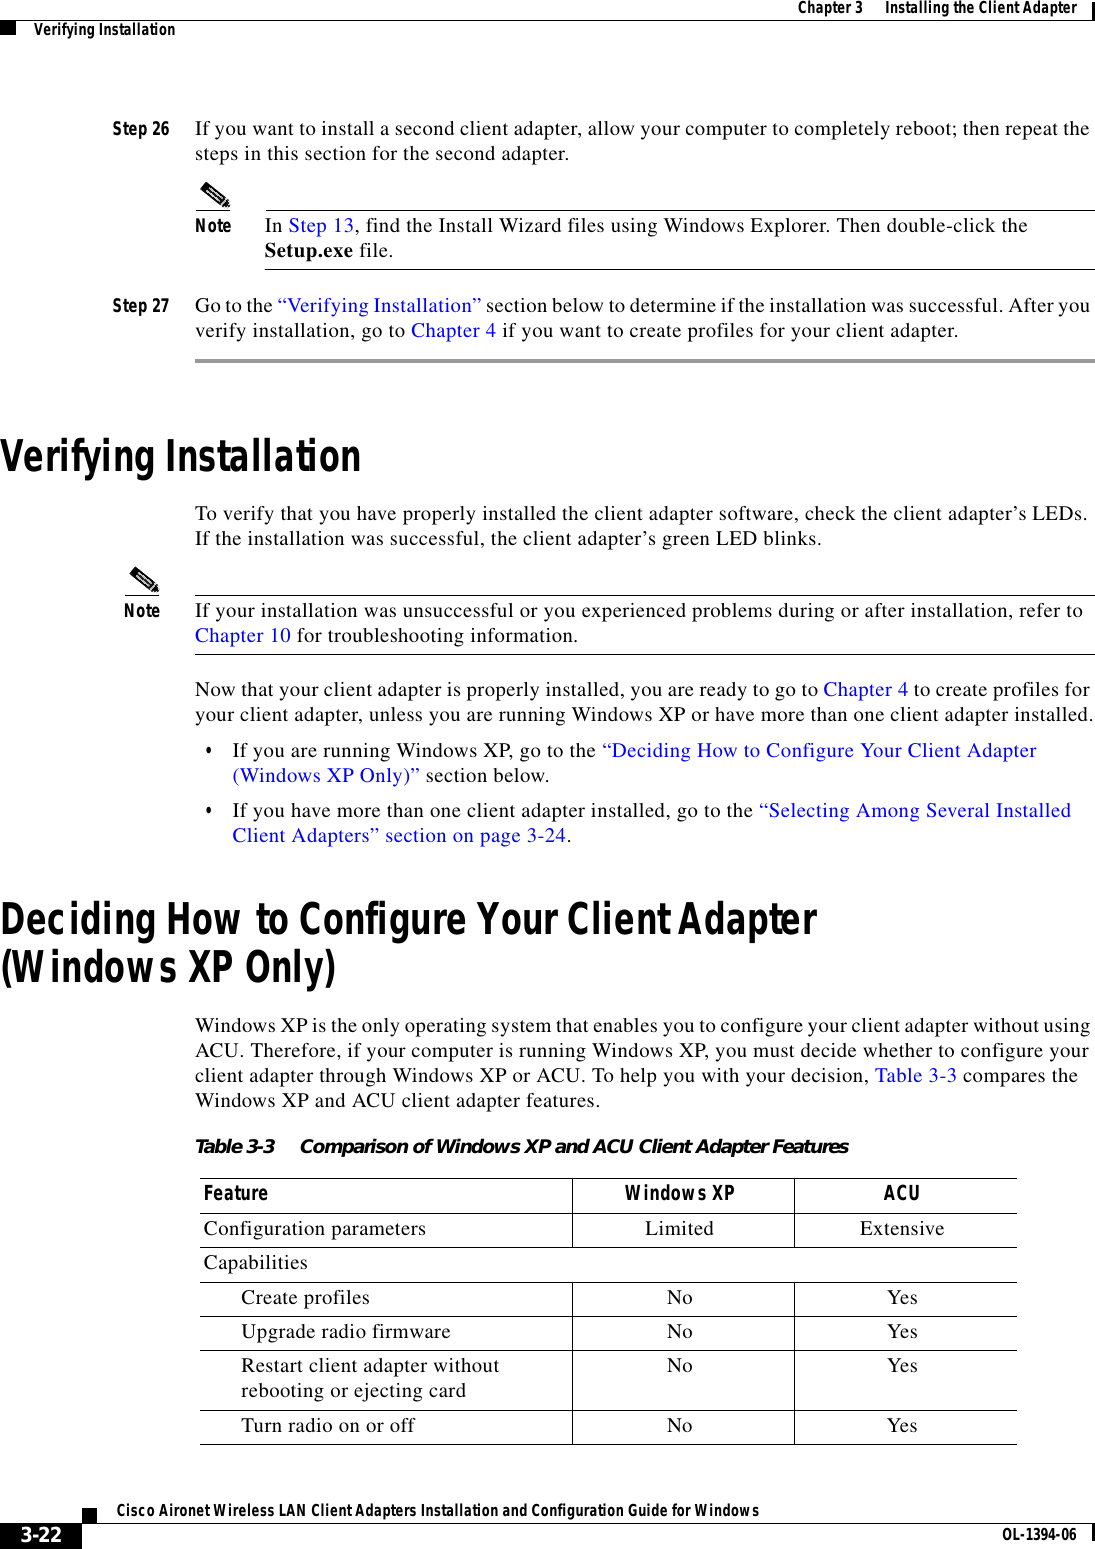 3-22Cisco Aironet Wireless LAN Client Adapters Installation and Configuration Guide for Windows OL-1394-06Chapter 3      Installing the Client AdapterVerifying InstallationStep 26 If you want to install a second client adapter, allow your computer to completely reboot; then repeat the steps in this section for the second adapter.Note In Step 13, find the Install Wizard files using Windows Explorer. Then double-click the Setup.exe file.Step 27 Go to the “Verifying Installation” section below to determine if the installation was successful. After you verify installation, go to Chapter 4 if you want to create profiles for your client adapter.Verifying InstallationTo verify that you have properly installed the client adapter software, check the client adapter’s LEDs. If the installation was successful, the client adapter’s green LED blinks.Note If your installation was unsuccessful or you experienced problems during or after installation, refer to Chapter 10 for troubleshooting information.Now that your client adapter is properly installed, you are ready to go to Chapter 4 to create profiles for your client adapter, unless you are running Windows XP or have more than one client adapter installed.•If you are running Windows XP, go to the “Deciding How to Configure Your Client Adapter (Windows XP Only)” section below.•If you have more than one client adapter installed, go to the “Selecting Among Several Installed Client Adapters” section on page 3-24.Deciding How to Configure Your Client Adapter(Windows XP Only)Windows XP is the only operating system that enables you to configure your client adapter without using ACU. Therefore, if your computer is running Windows XP, you must decide whether to configure your client adapter through Windows XP or ACU. To help you with your decision, Table 3-3 compares the Windows XP and ACU client adapter features.Table 3-3 Comparison of Windows XP and ACU Client Adapter FeaturesFeature Windows XP ACUConfiguration parameters Limited ExtensiveCapabilitiesCreate profiles No YesUpgrade radio firmware No YesRestart client adapter without rebooting or ejecting card No YesTurn radio on or off No Yes